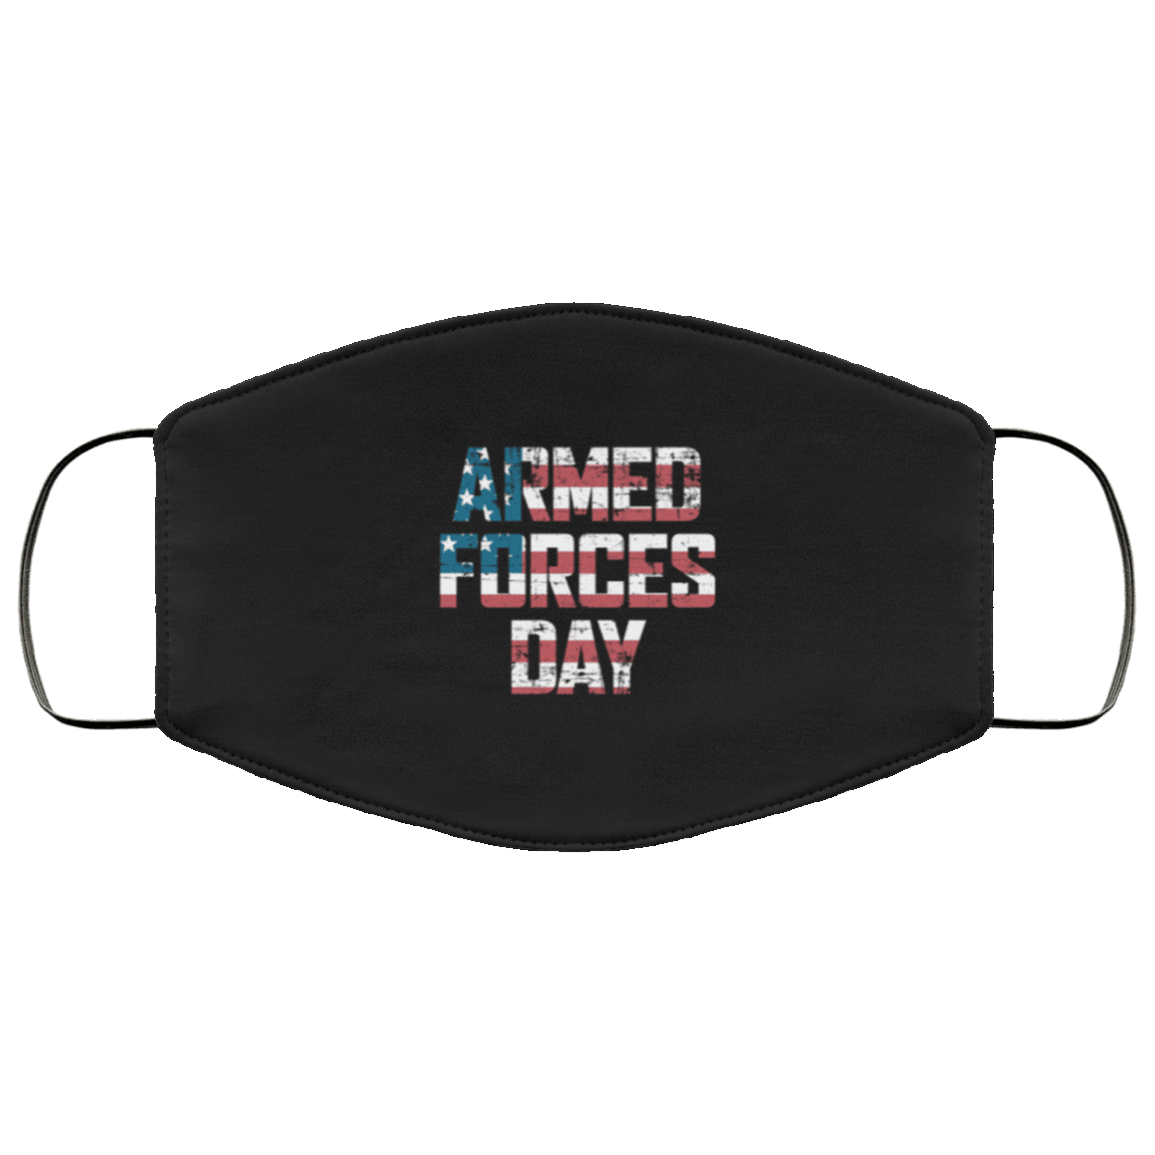 Designs by MyUtopia Shout Out:Armed Forces Day US Flag Adult Fabric Face Mask with Elastic Ear Loops,3 Layer Fabric Face Mask / Black / Adult,Fabric Face Mask